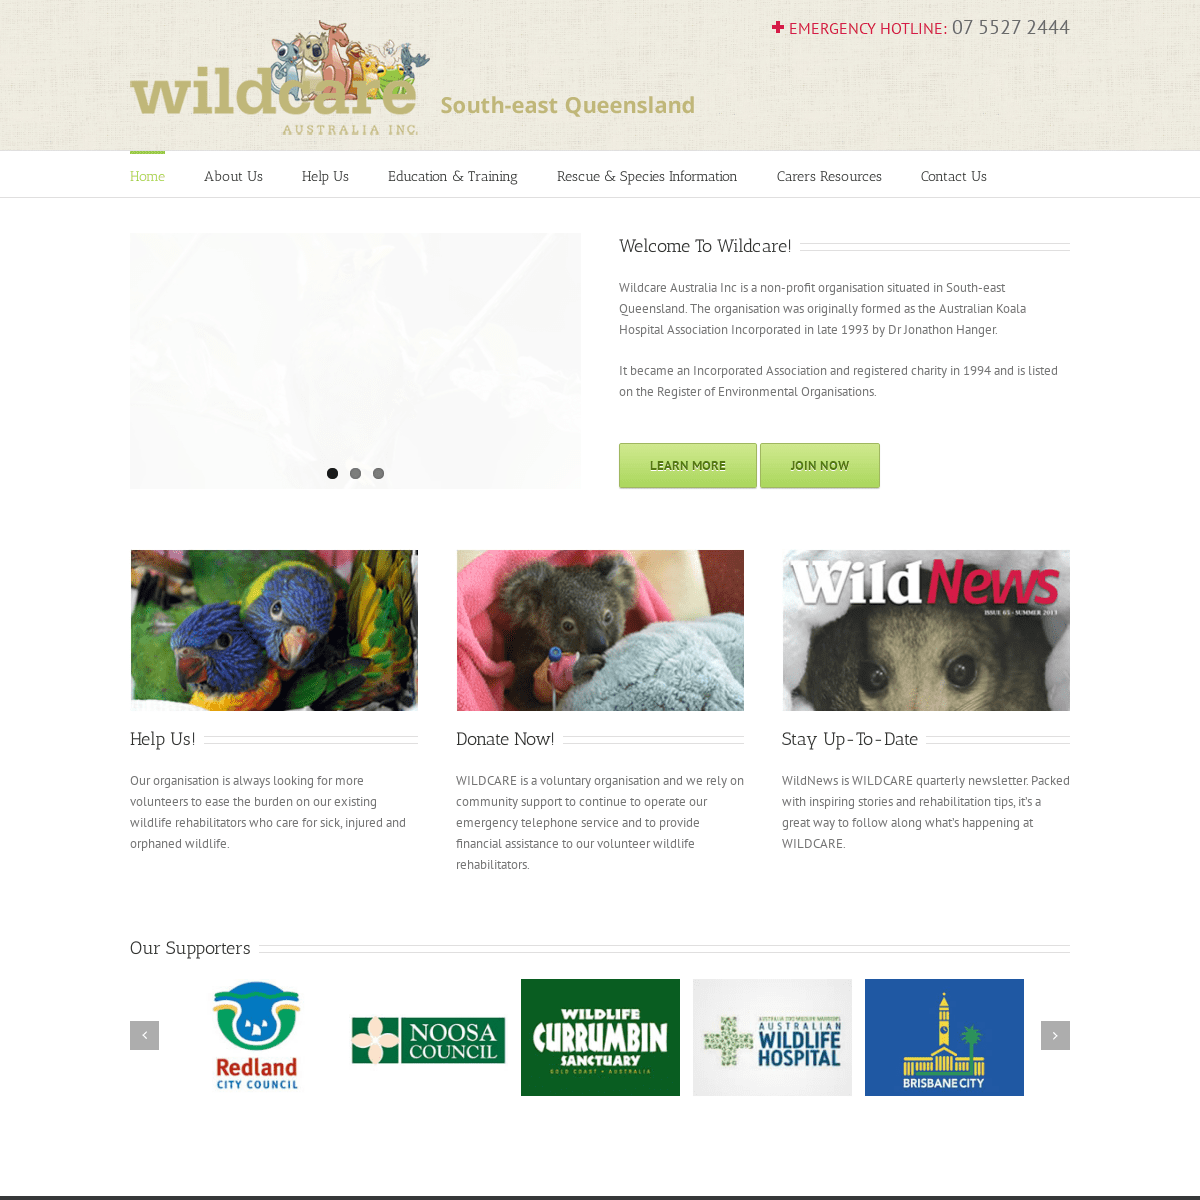 A complete backup of https://wildcare.org.au